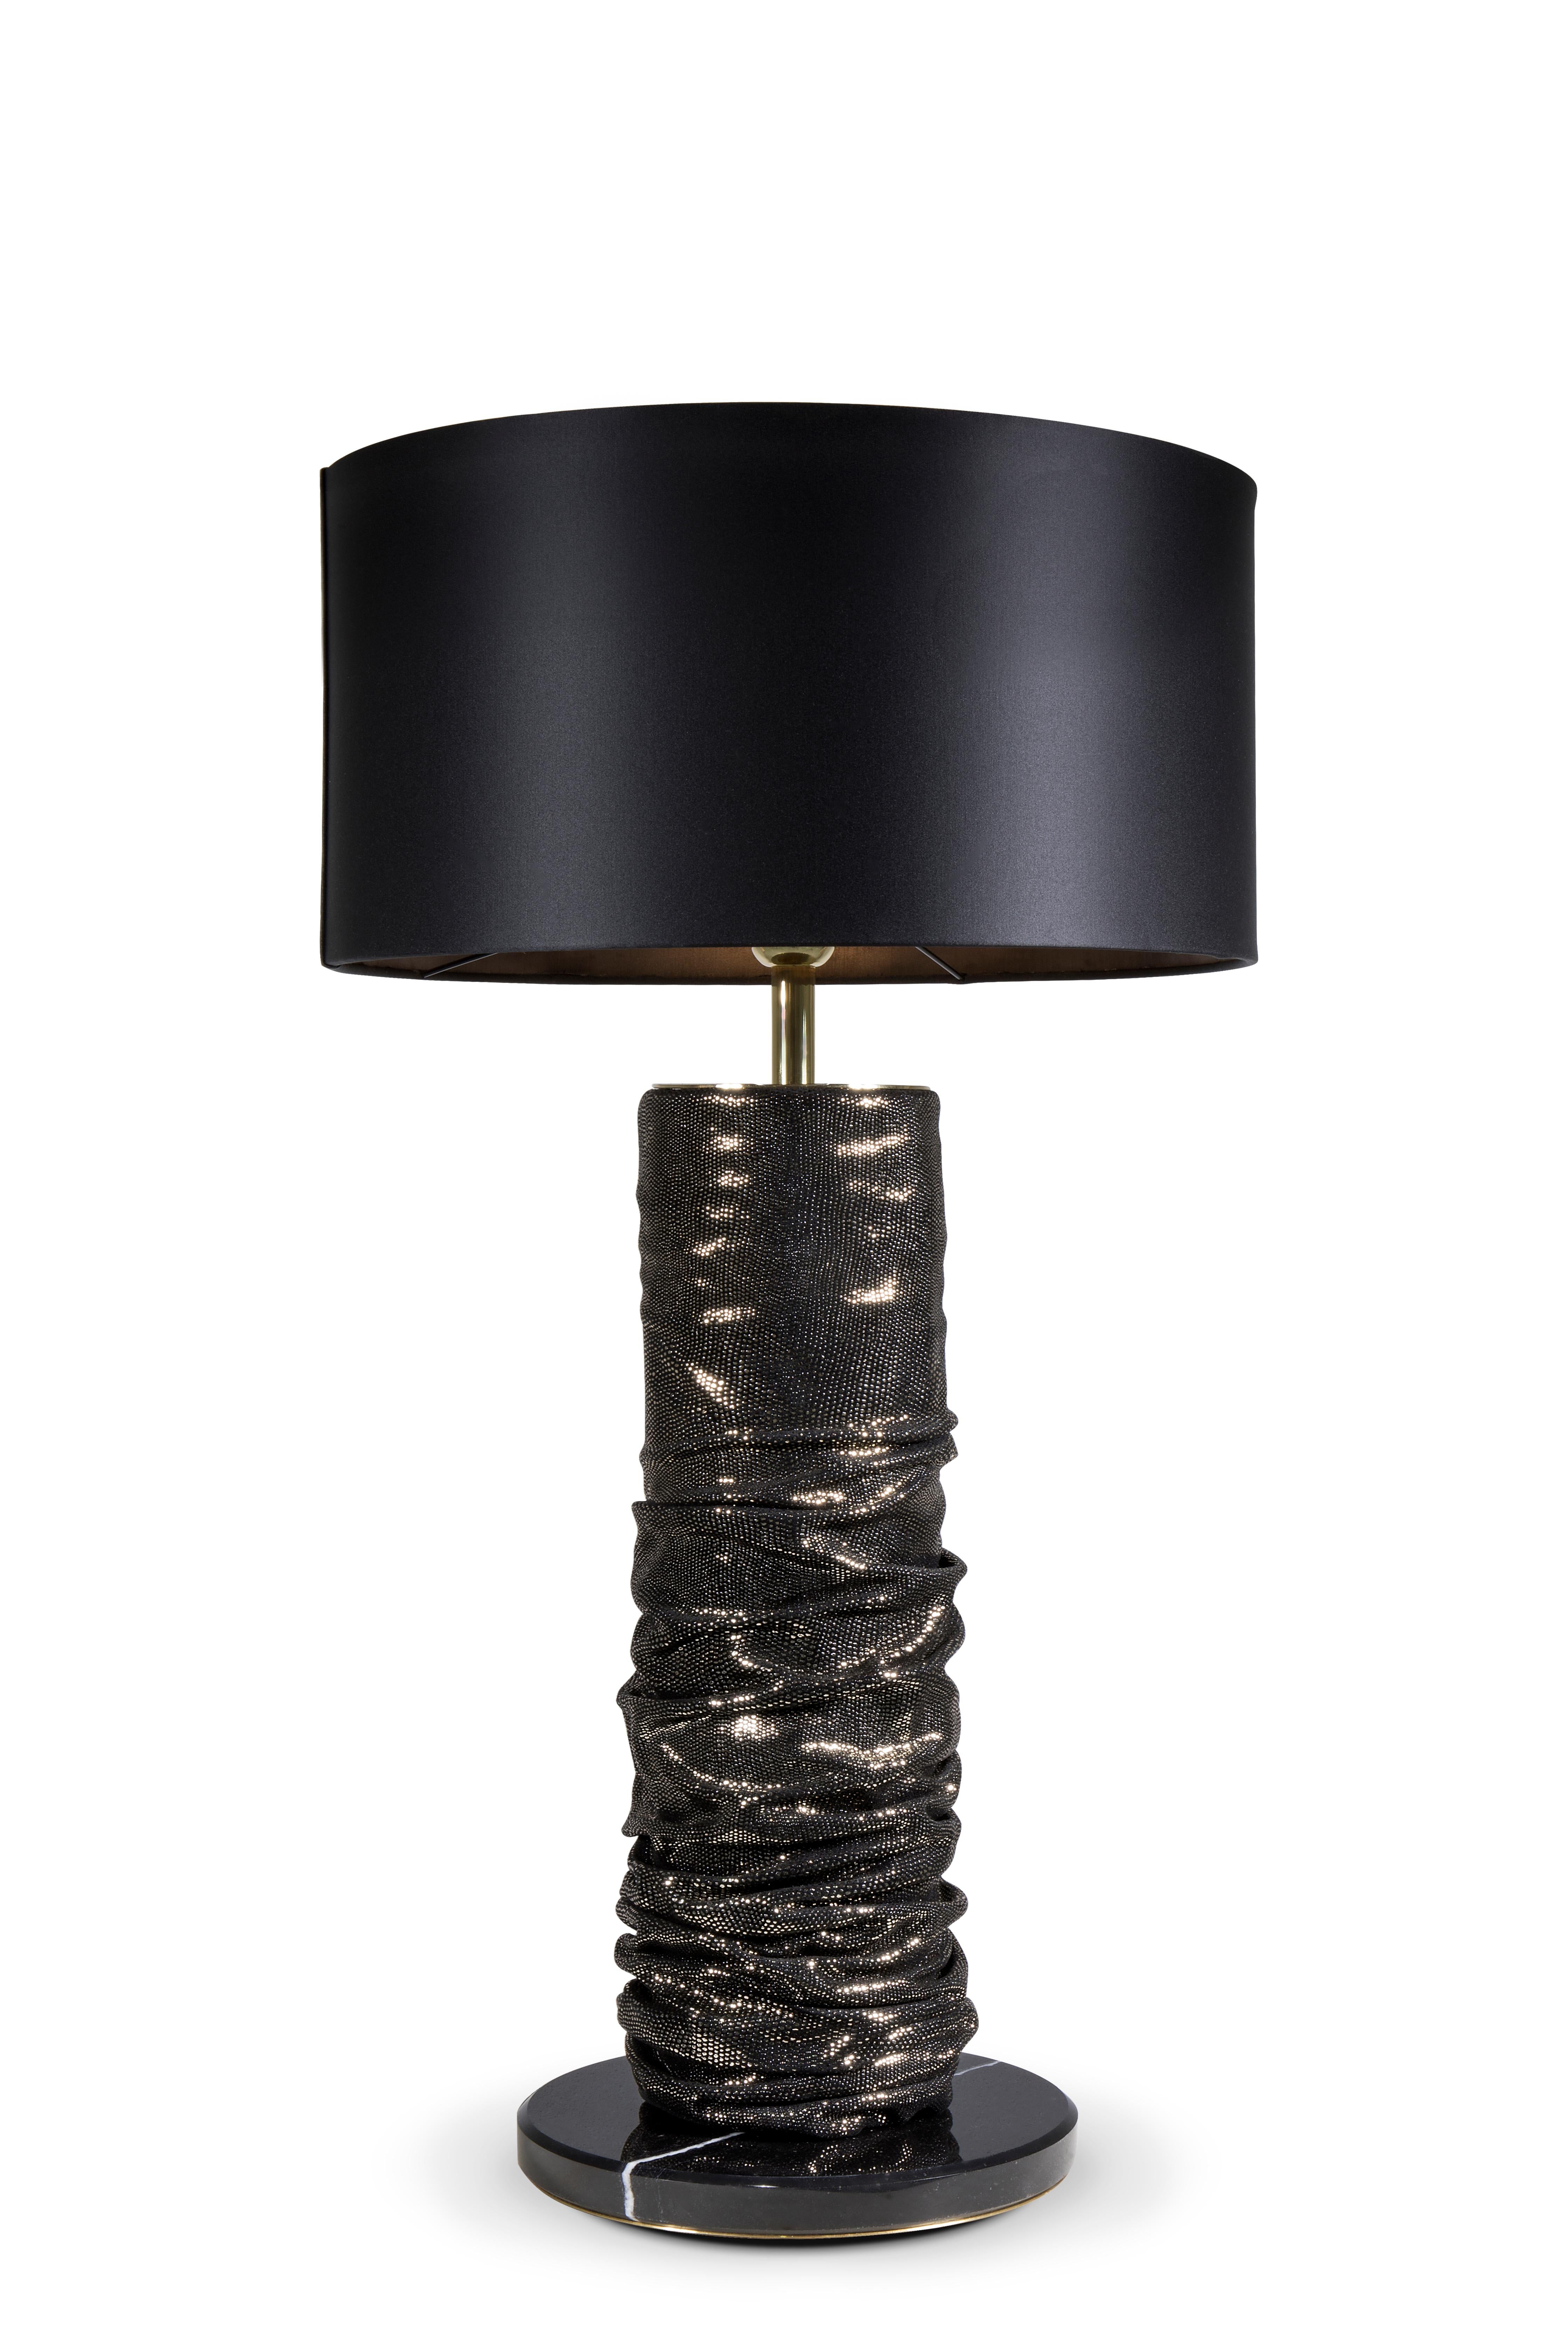 The curvaceous Ruche lamp is a flash back to the 1980s slouch sleeve and boot. Its gathered leather-like shape glistens under its light.

Base: Polished Nero marquina marble
Body: Pixel Gold leather from Koket textiles collection
Lamp shade: Opulent